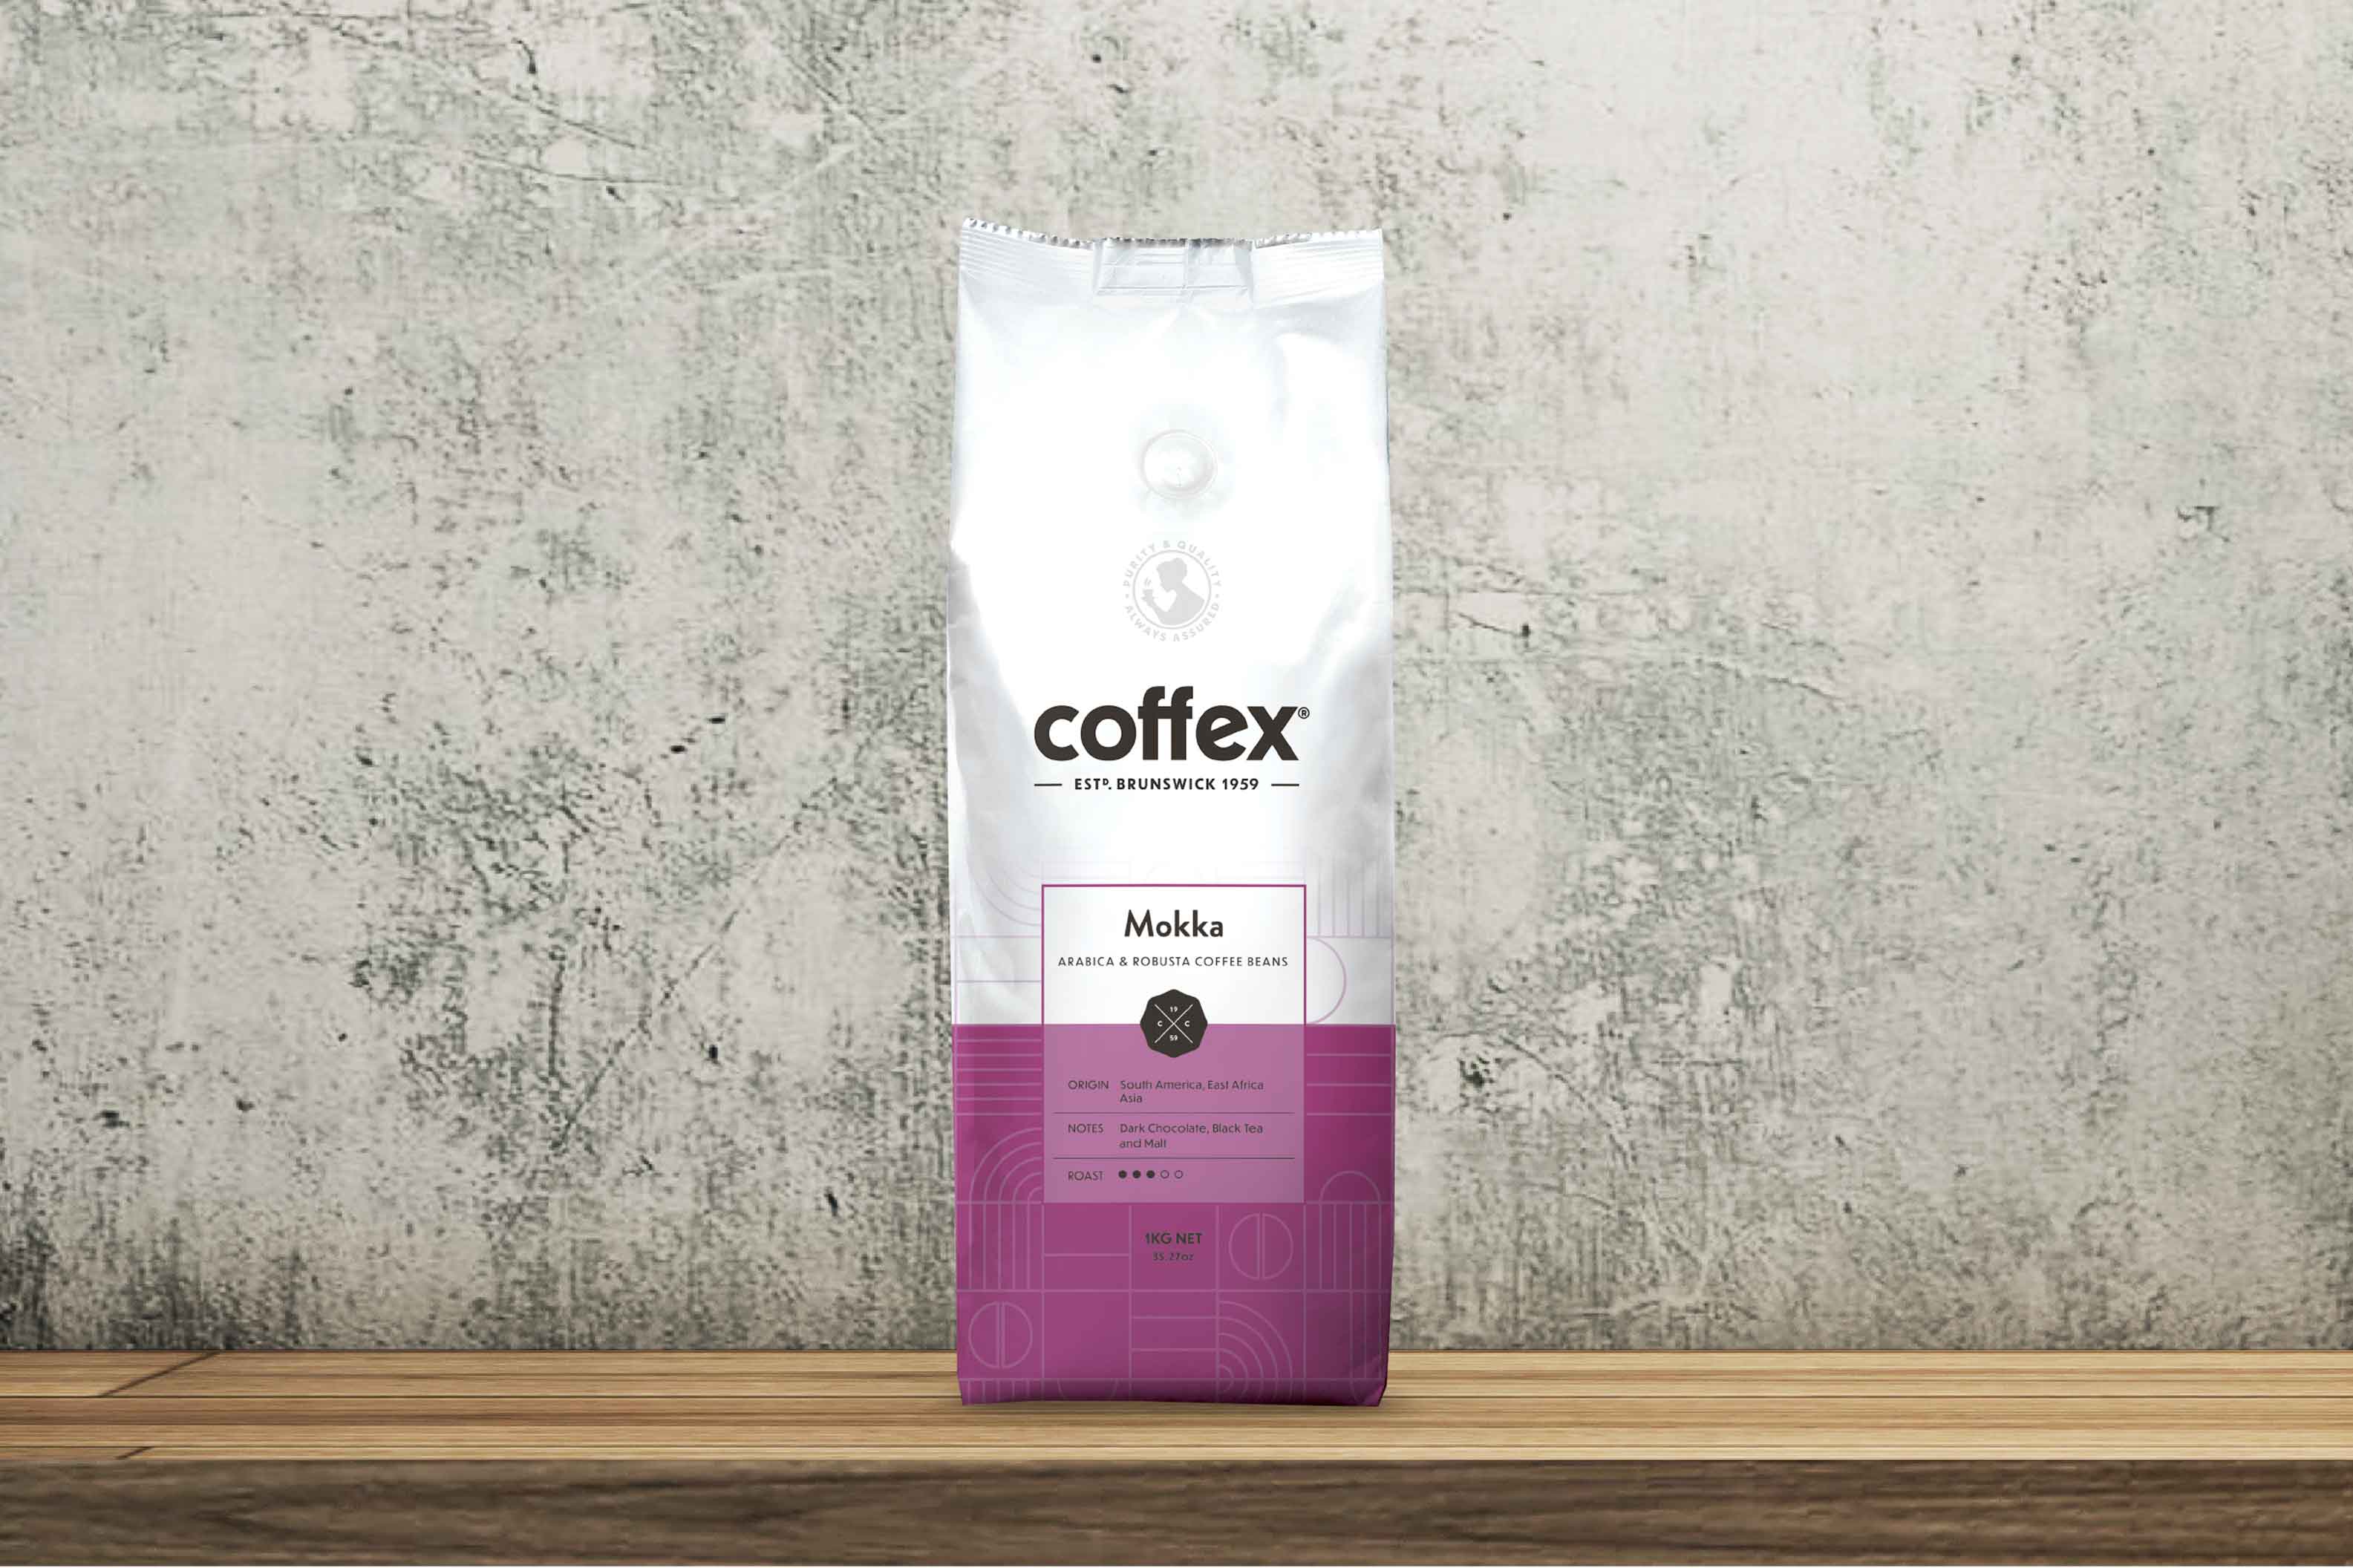 Coffex Classic Mokka, A full-bodied blend of vibrant arabica and robust beans, roasted to perfection.